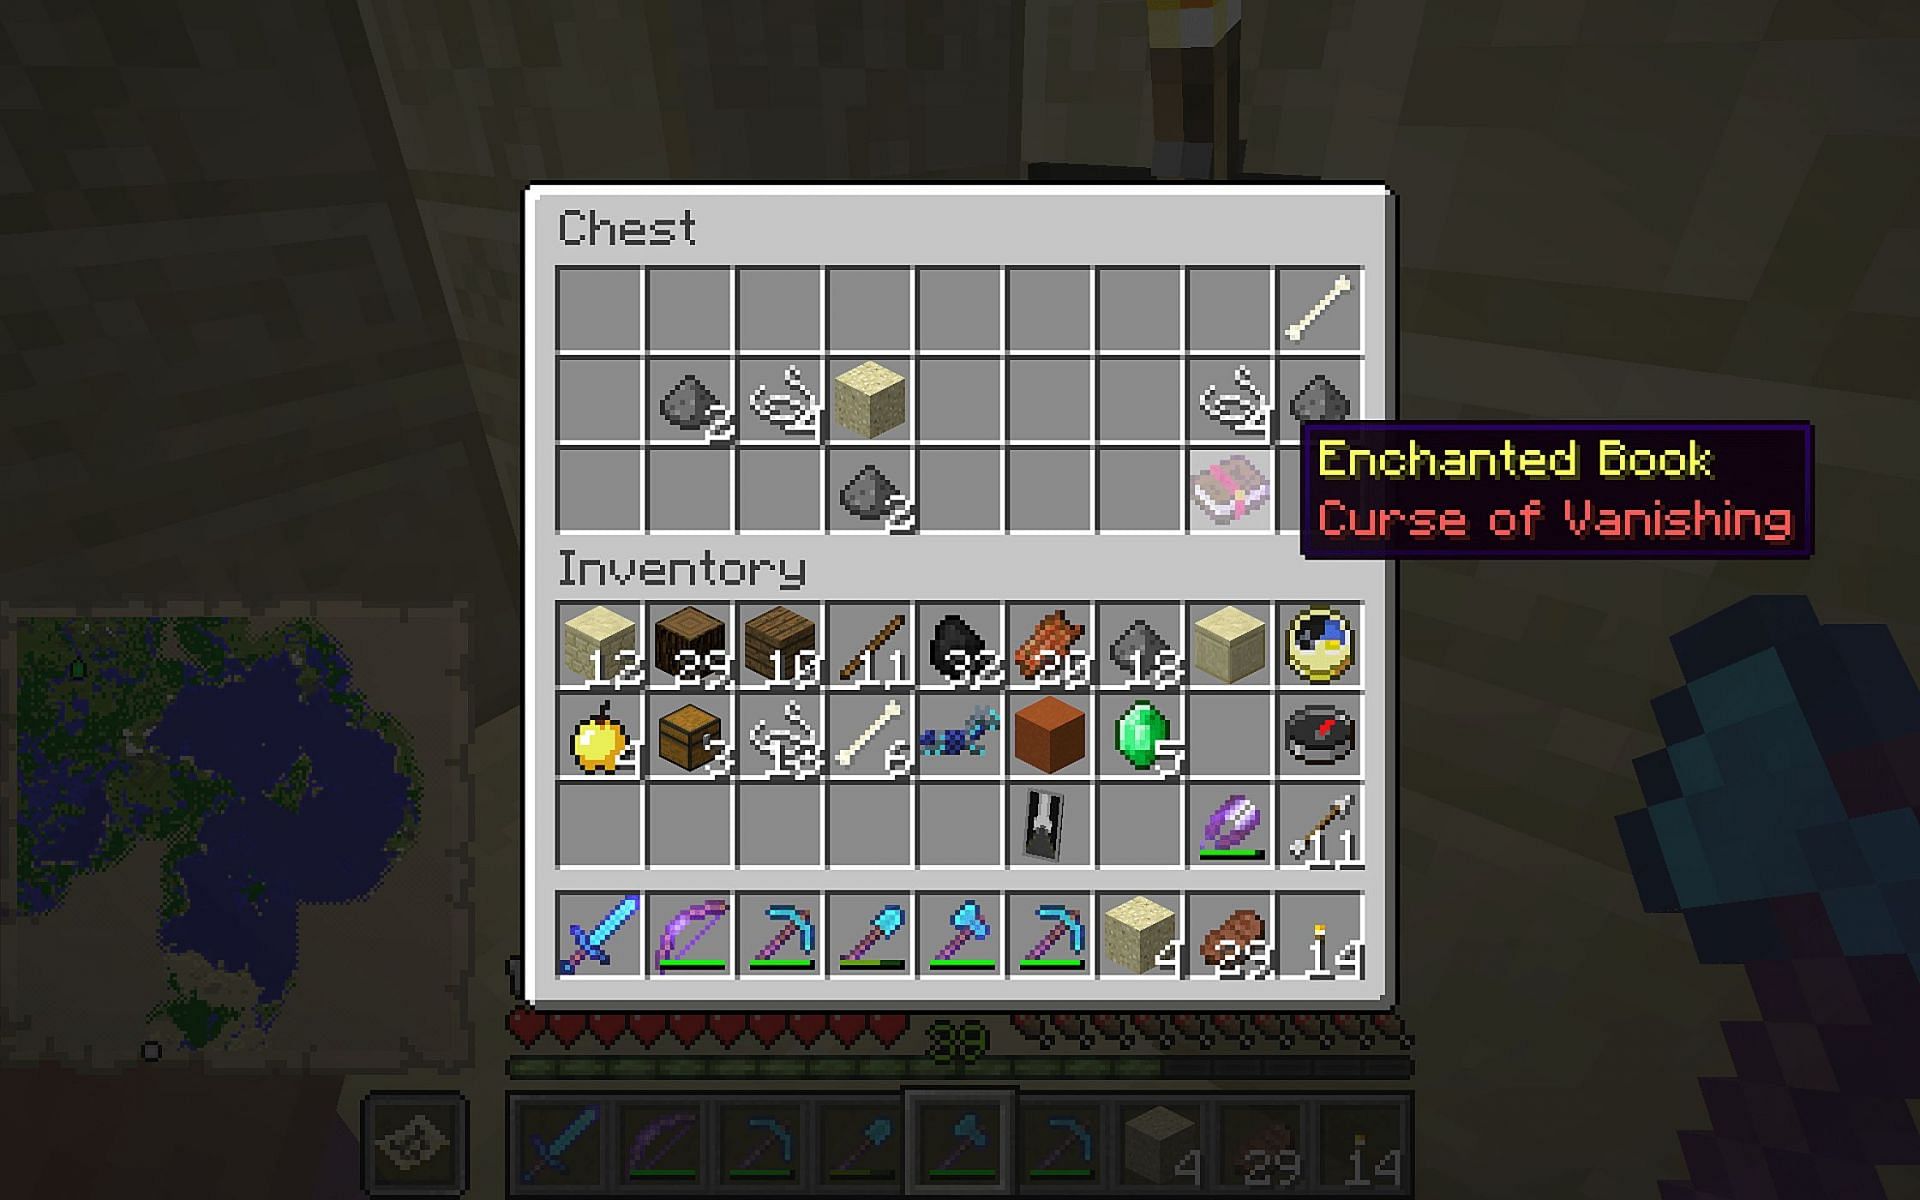 Curse of Vanishing can be applied to several different items (Image via Mojang)